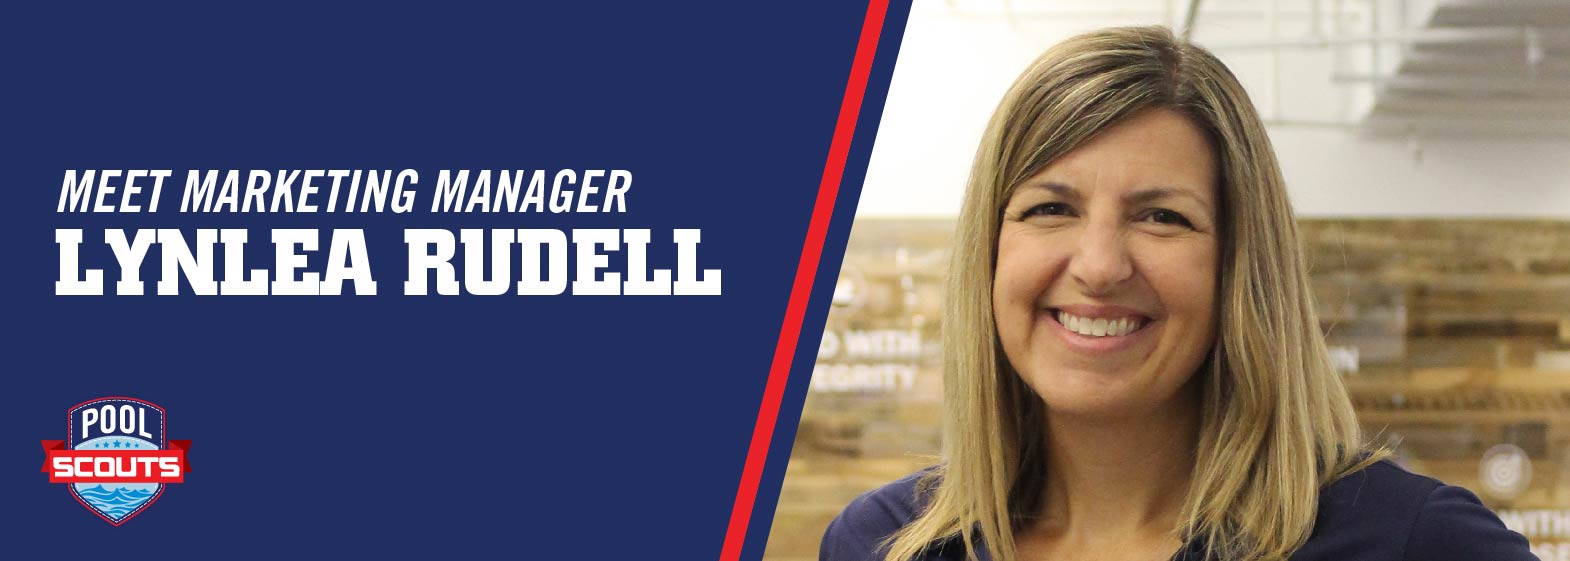 New Pool Scouts Marketing Manager Lynlea Rudell